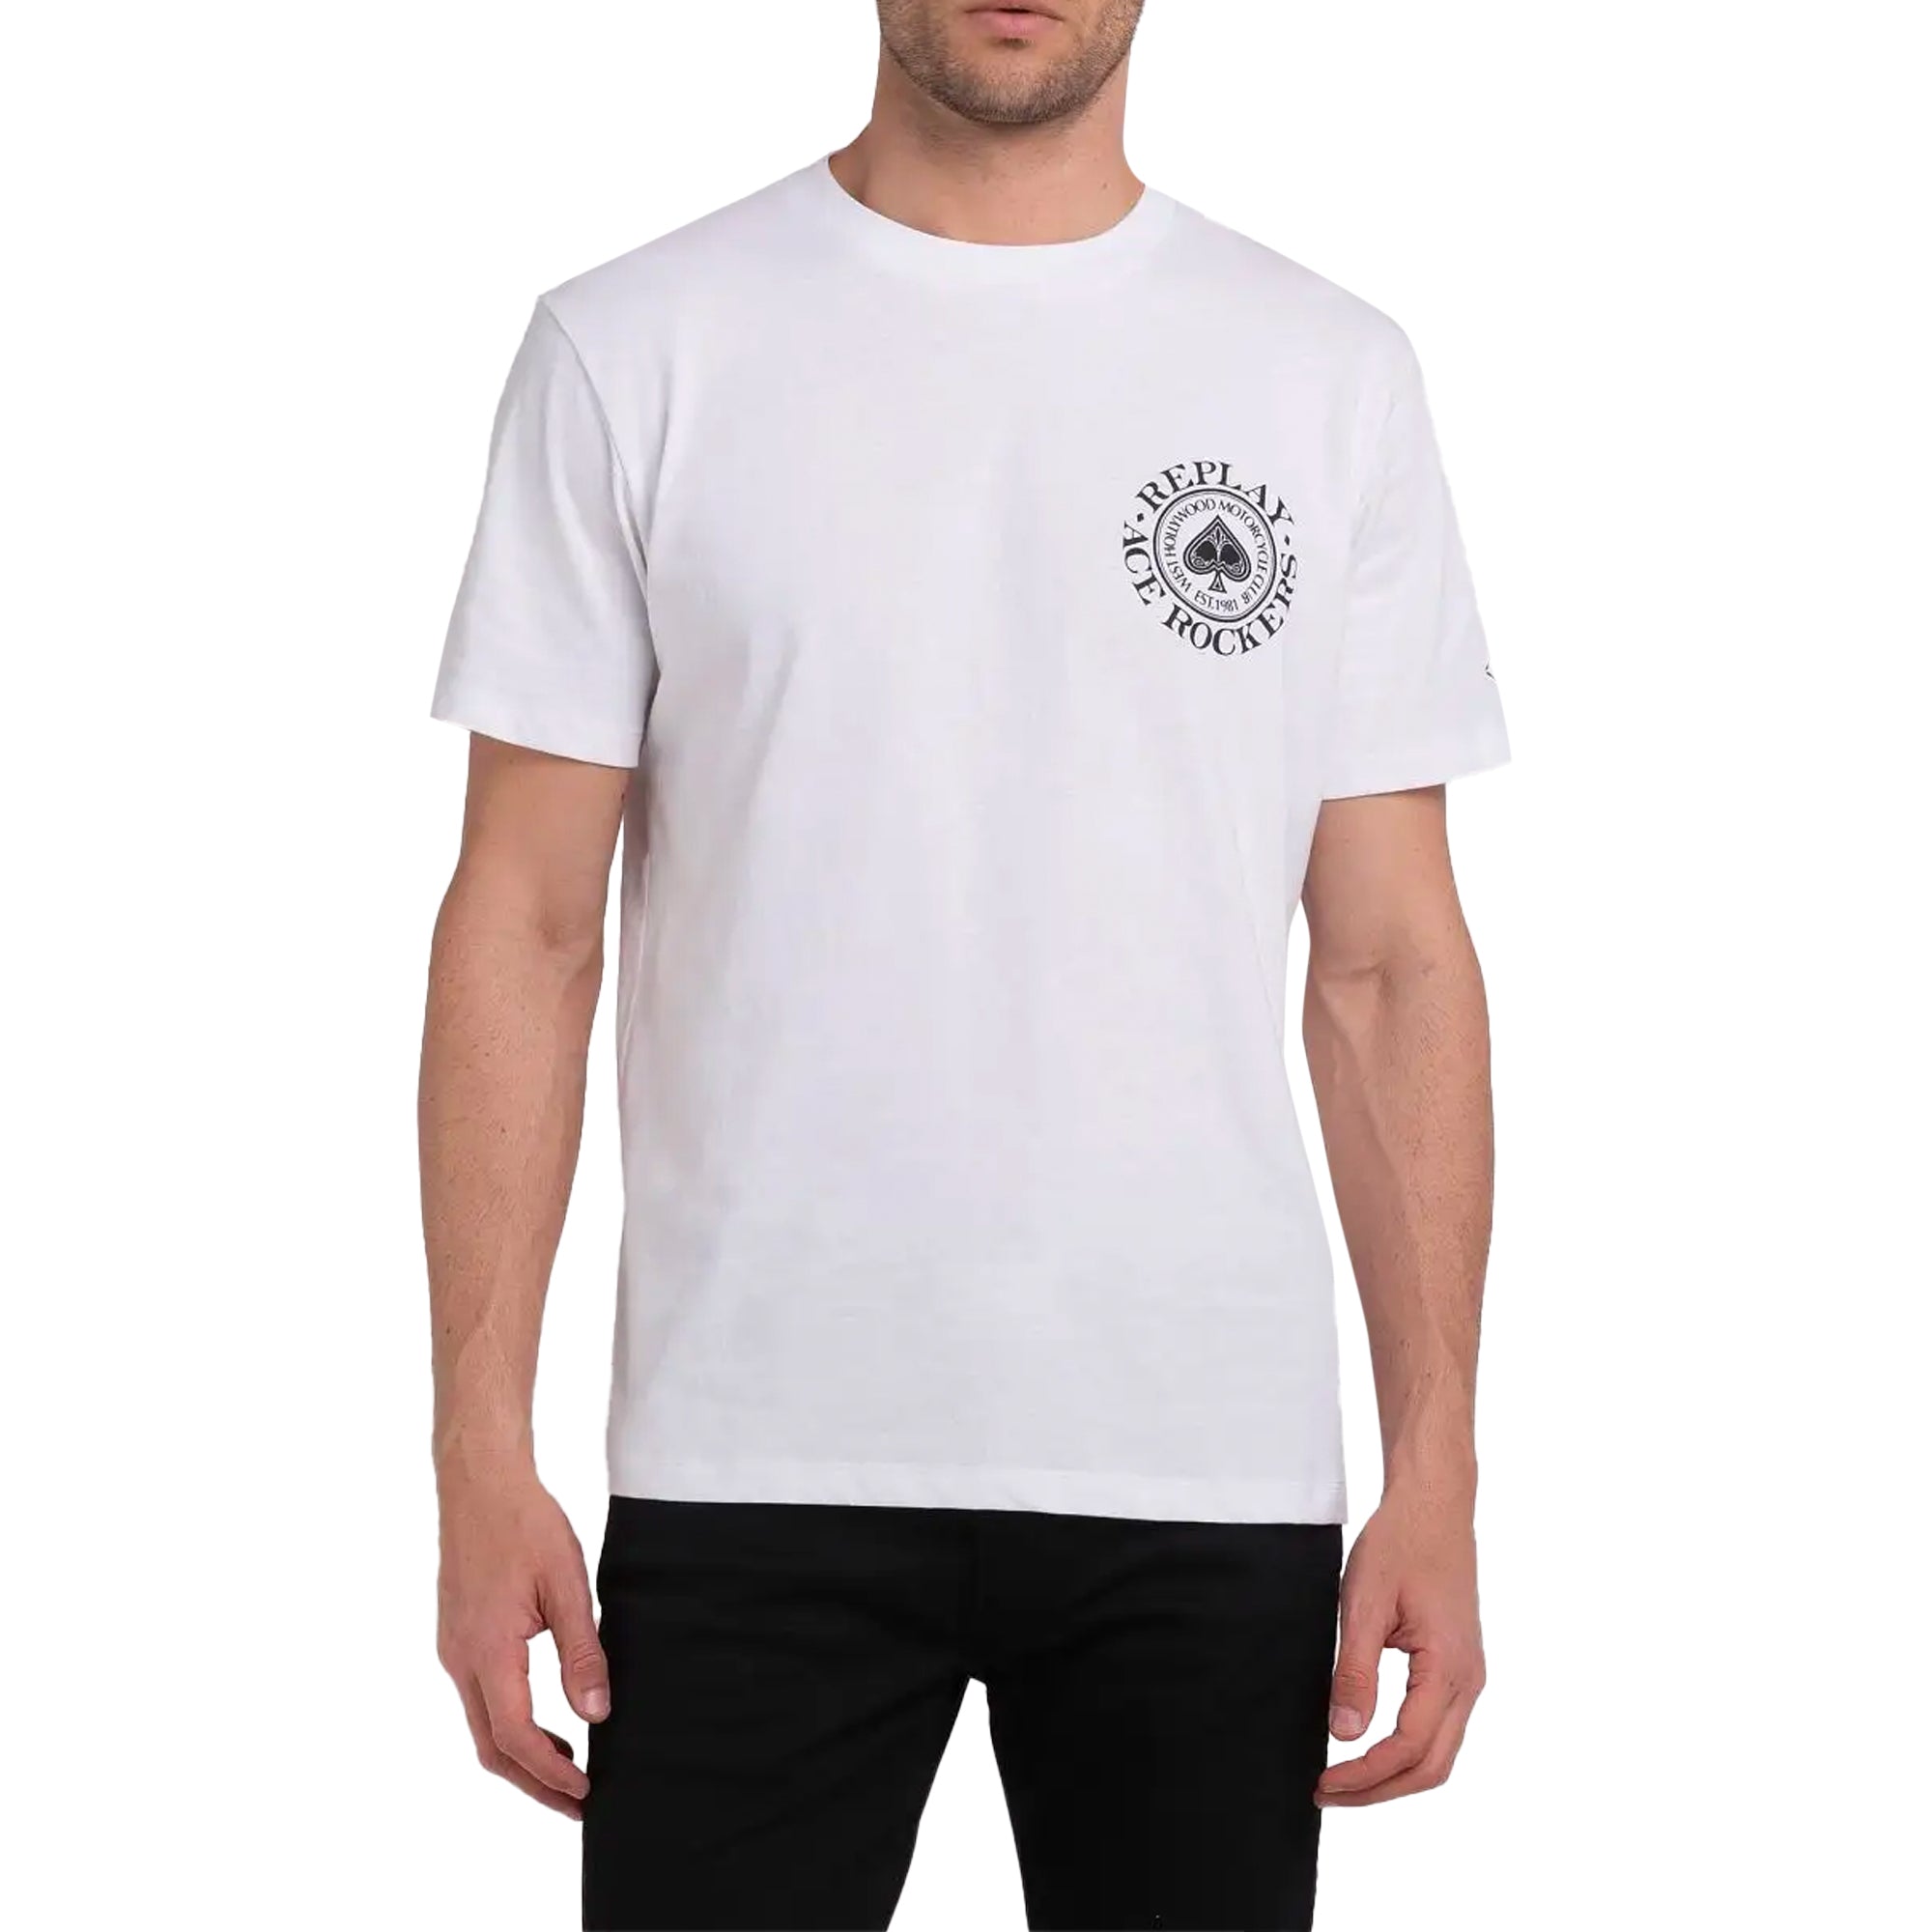 Replay Ace Of Spades Rockers T-Shirt - White